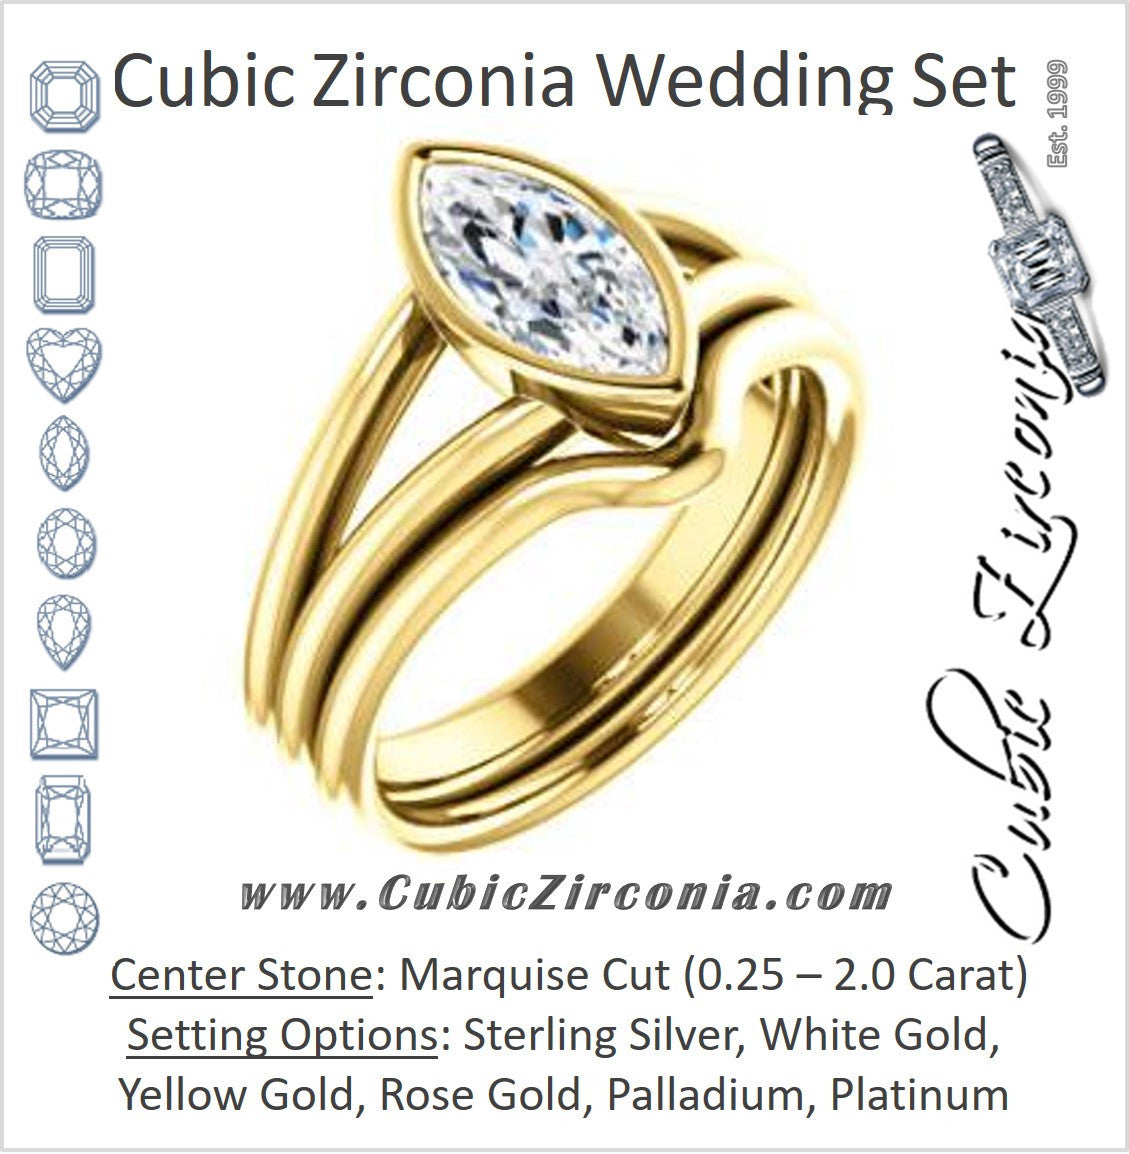 CZ Wedding Set, featuring The Shae engagement ring (Customizable Marquise Cut Split-Band Solitaire)